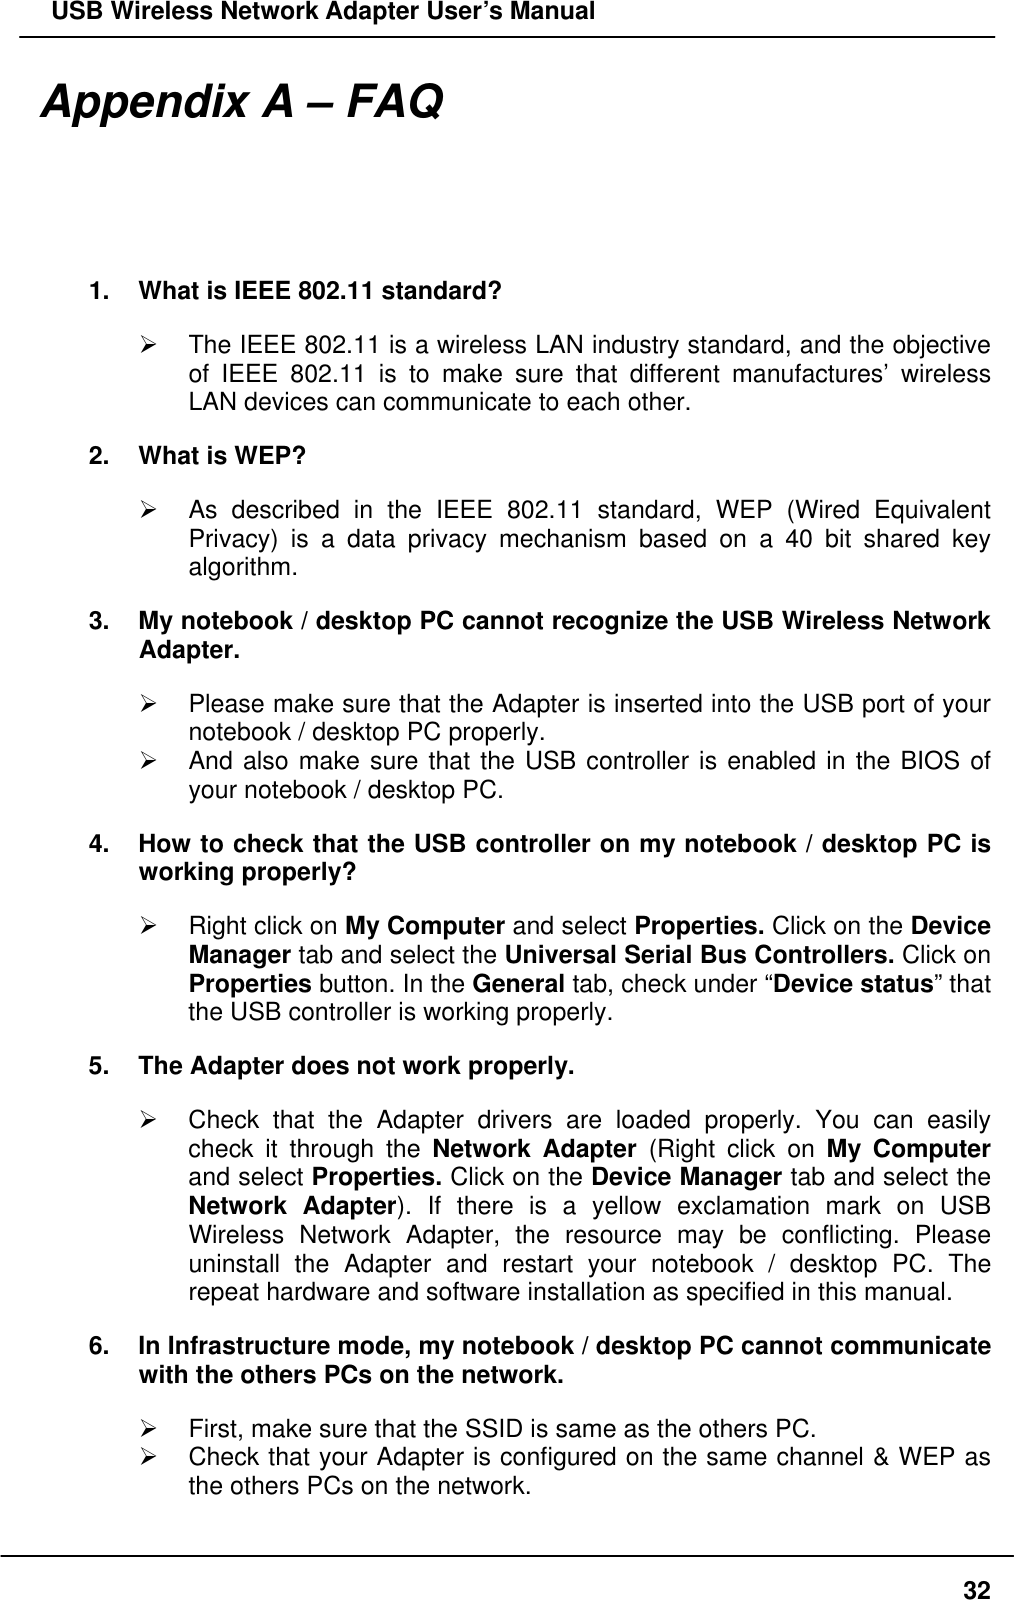   USB Wireless Network Adapter User’s Manual Appendix A – FAQ 1.  What is IEEE 802.11 standard?   The IEEE 802.11 is a wireless LAN industry standard, and the objective of IEEE 802.11 is to make sure that different manufactures’ wireless LAN devices can communicate to each other. 2.  What is WEP?   As described in the IEEE 802.11 standard, WEP (Wired Equivalent Privacy) is a data privacy mechanism based on a 40 bit shared key algorithm. 3.  My notebook / desktop PC cannot recognize the USB Wireless Network Adapter.   Please make sure that the Adapter is inserted into the USB port of your notebook / desktop PC properly.   And also make sure that the USB controller is enabled in the BIOS of your notebook / desktop PC. 4.  How to check that the USB controller on my notebook / desktop PC is working properly?   Right click on My Computer and select Properties. Click on the Device Manager tab and select the Universal Serial Bus Controllers. Click on Properties button. In the General tab, check under “Device status” that the USB controller is working properly. 5.  The Adapter does not work properly.   Check that the Adapter drivers are loaded properly. You can easily check it through the Network Adapter (Right click on My Computer and select Properties. Click on the Device Manager tab and select the Network Adapter). If there is a yellow exclamation mark on USB Wireless Network Adapter, the resource may be conflicting. Please uninstall the Adapter and restart your notebook / desktop PC. The repeat hardware and software installation as specified in this manual.   6.  In Infrastructure mode, my notebook / desktop PC cannot communicate with the others PCs on the network.     First, make sure that the SSID is same as the others PC.   Check that your Adapter is configured on the same channel &amp; WEP as the others PCs on the network.  32